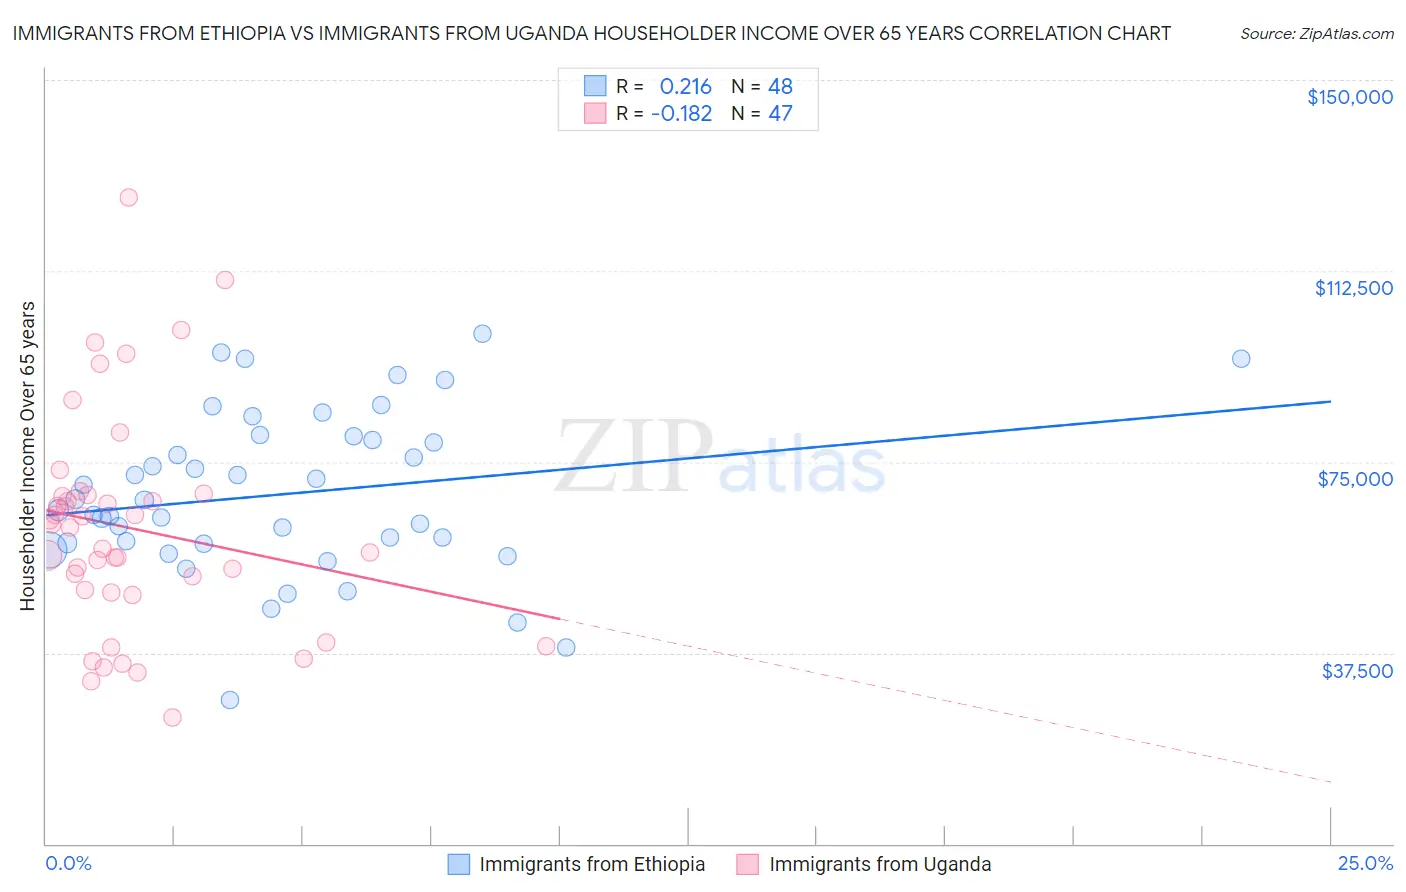 Immigrants from Ethiopia vs Immigrants from Uganda Householder Income Over 65 years